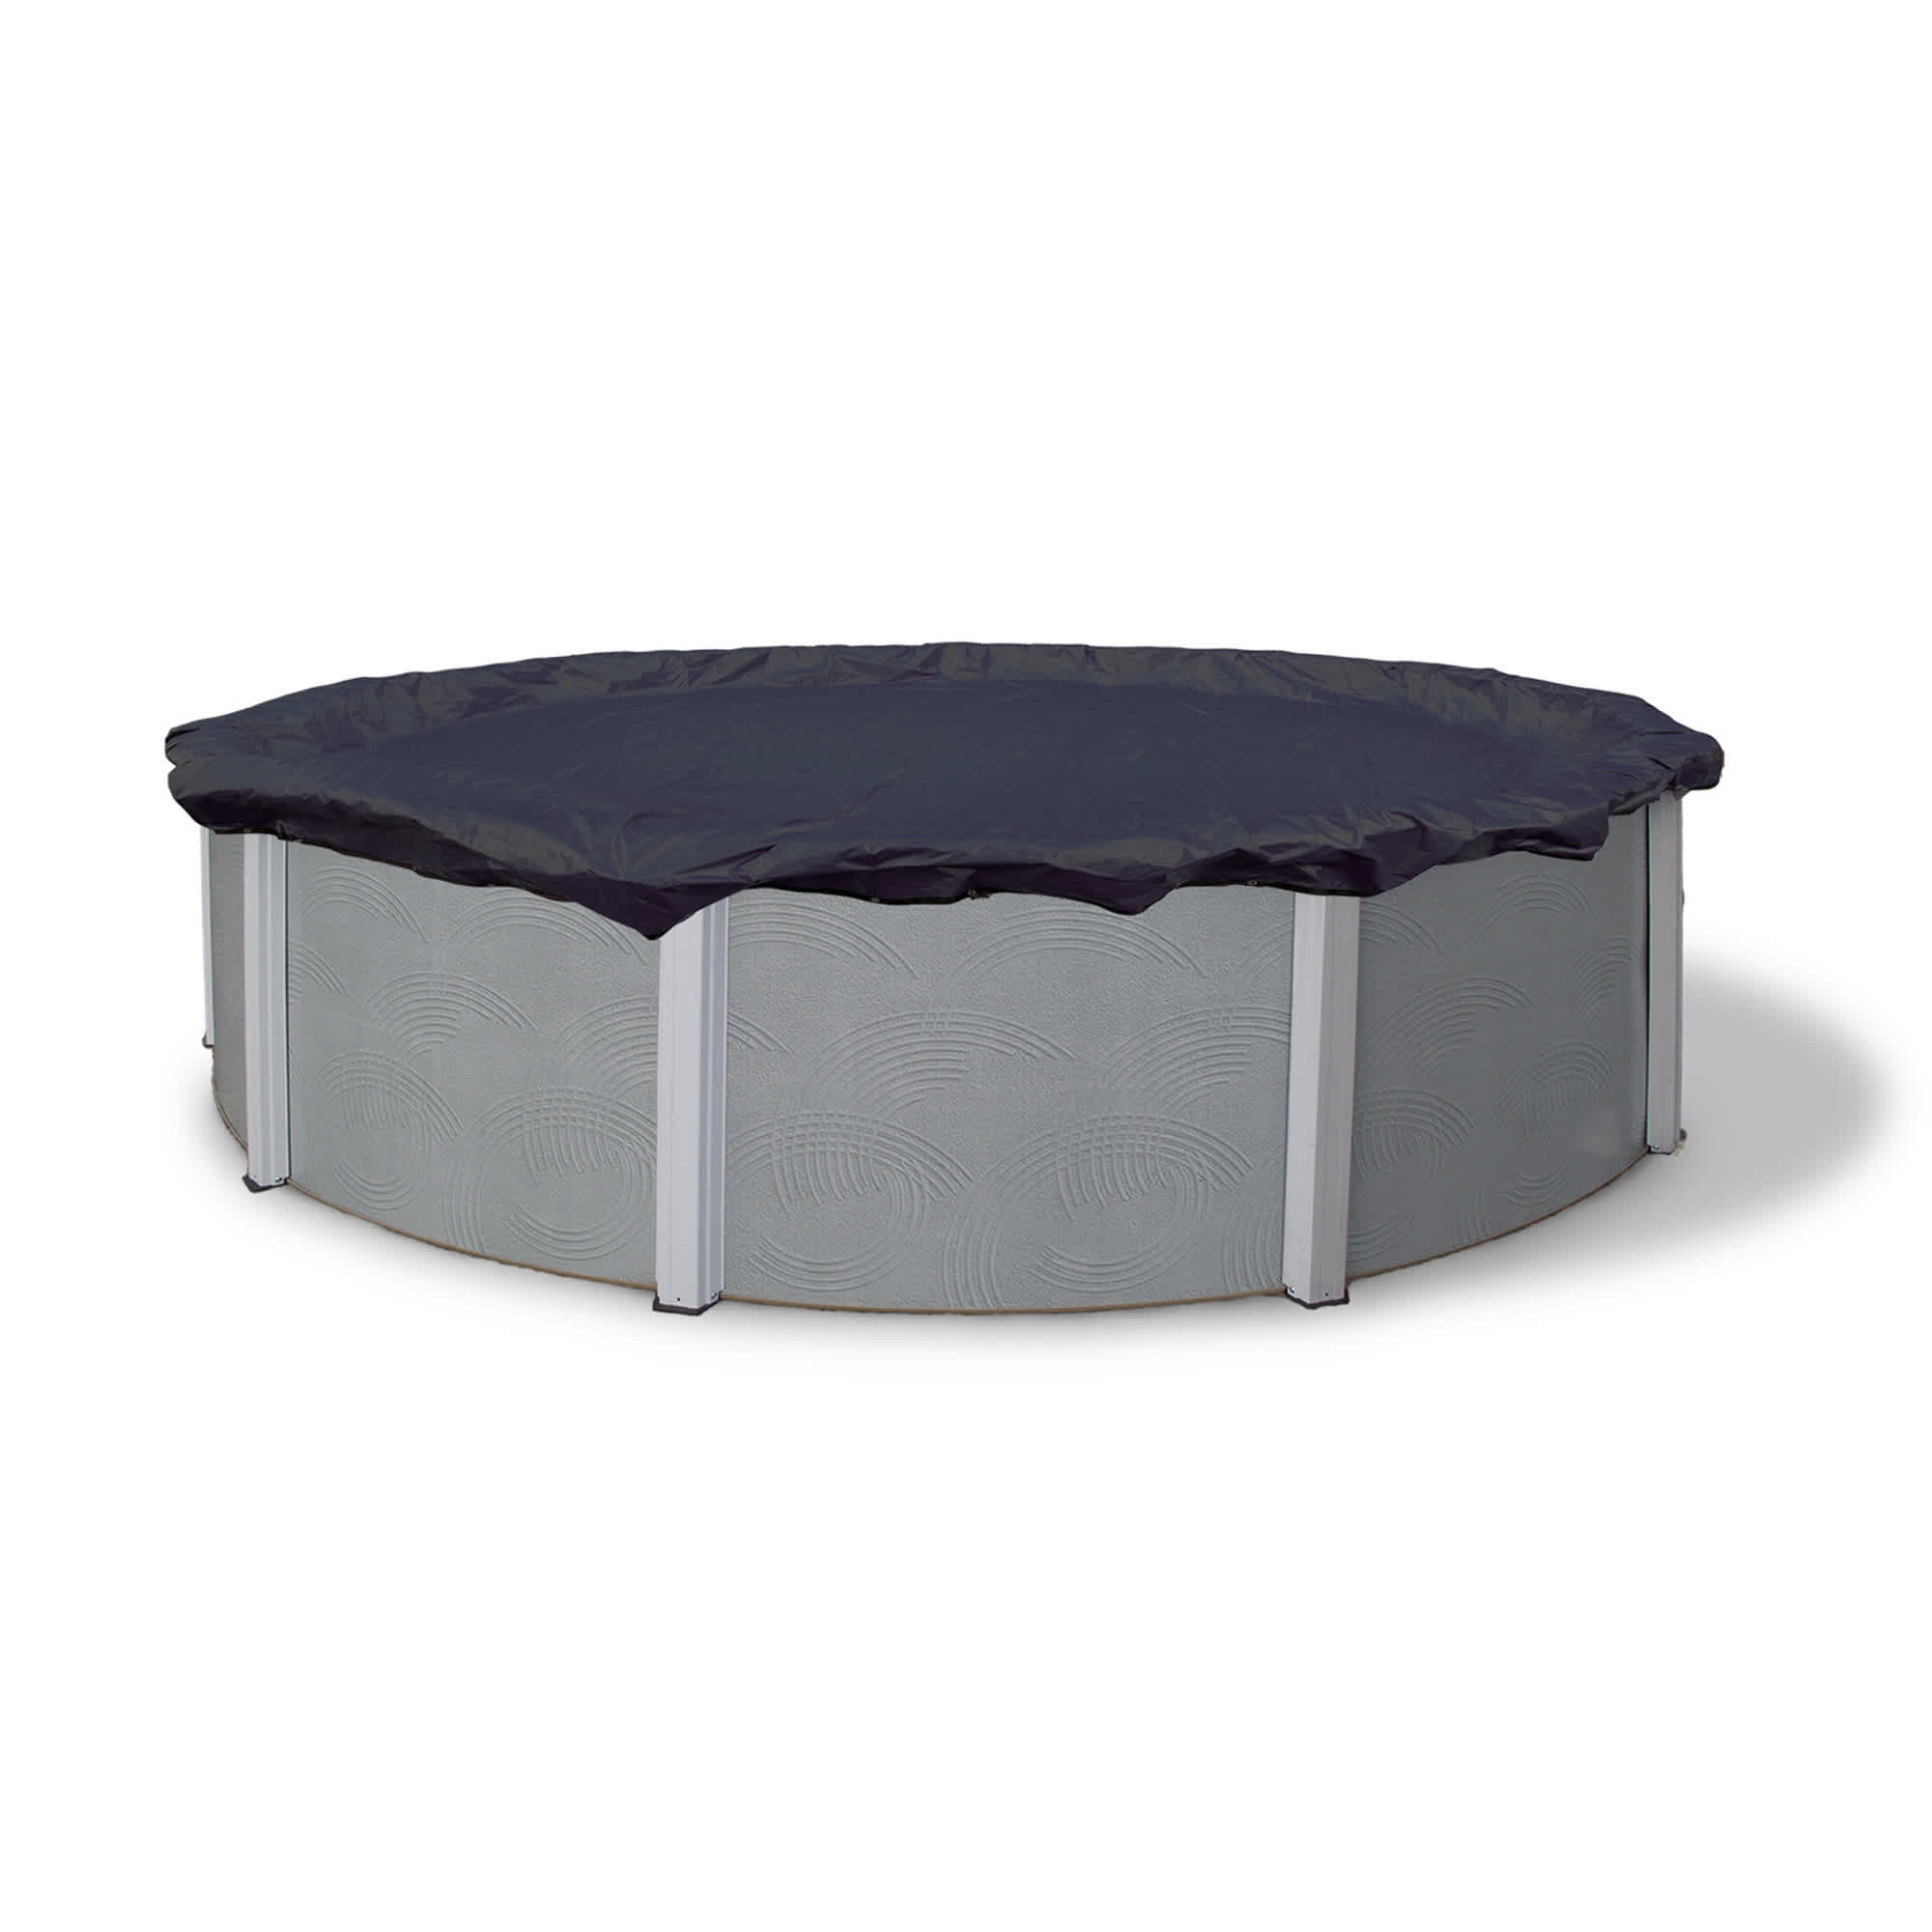 8-Year 24 ft Round Pool Winter Cover for sale online 